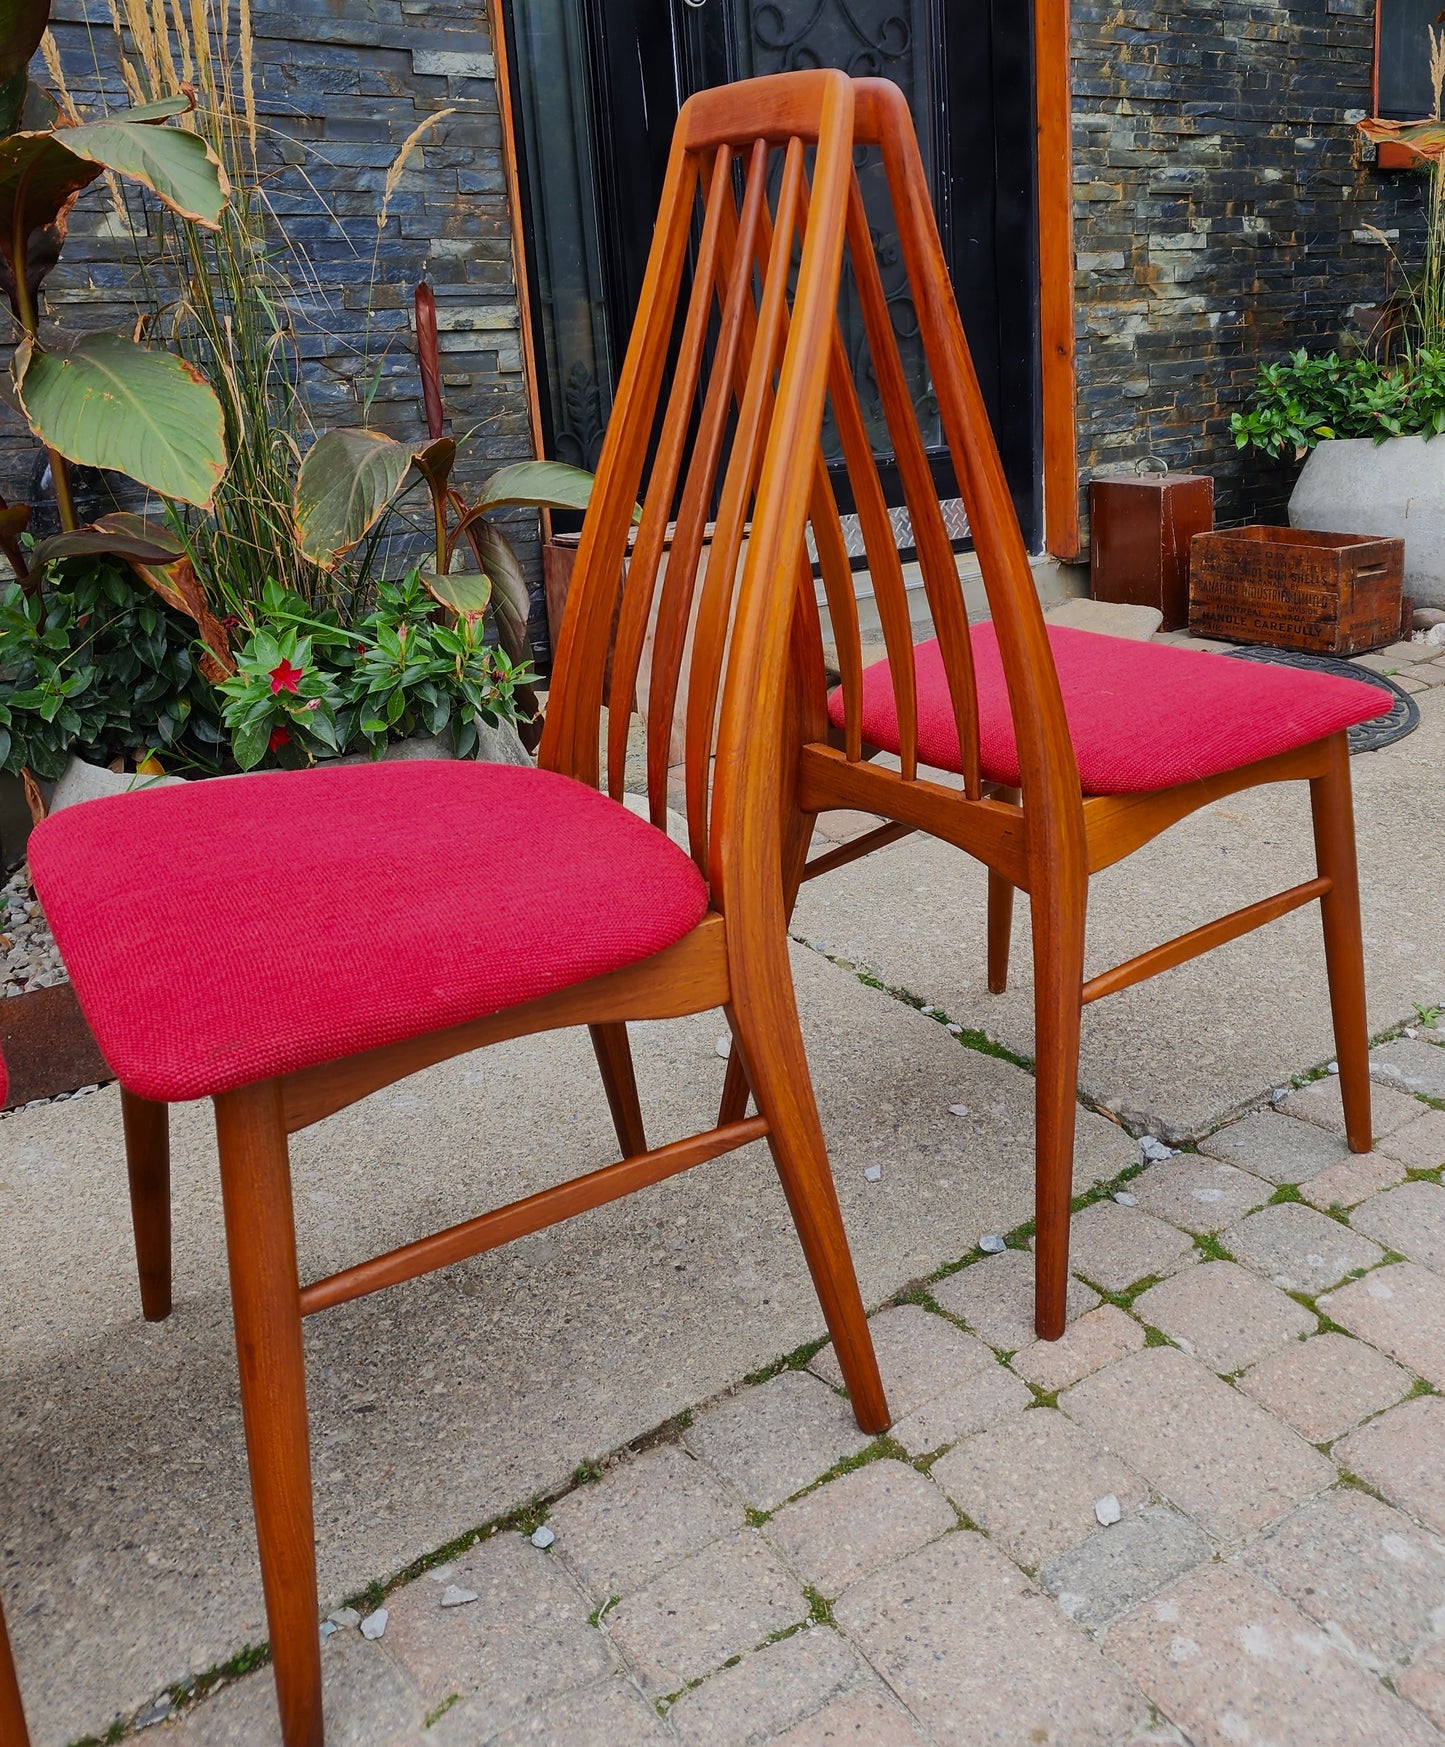 6 RESTORED Danish Mid Century Modern Teak Dining Chairs by Niels Kofoed, model Eva (12 chairs available)